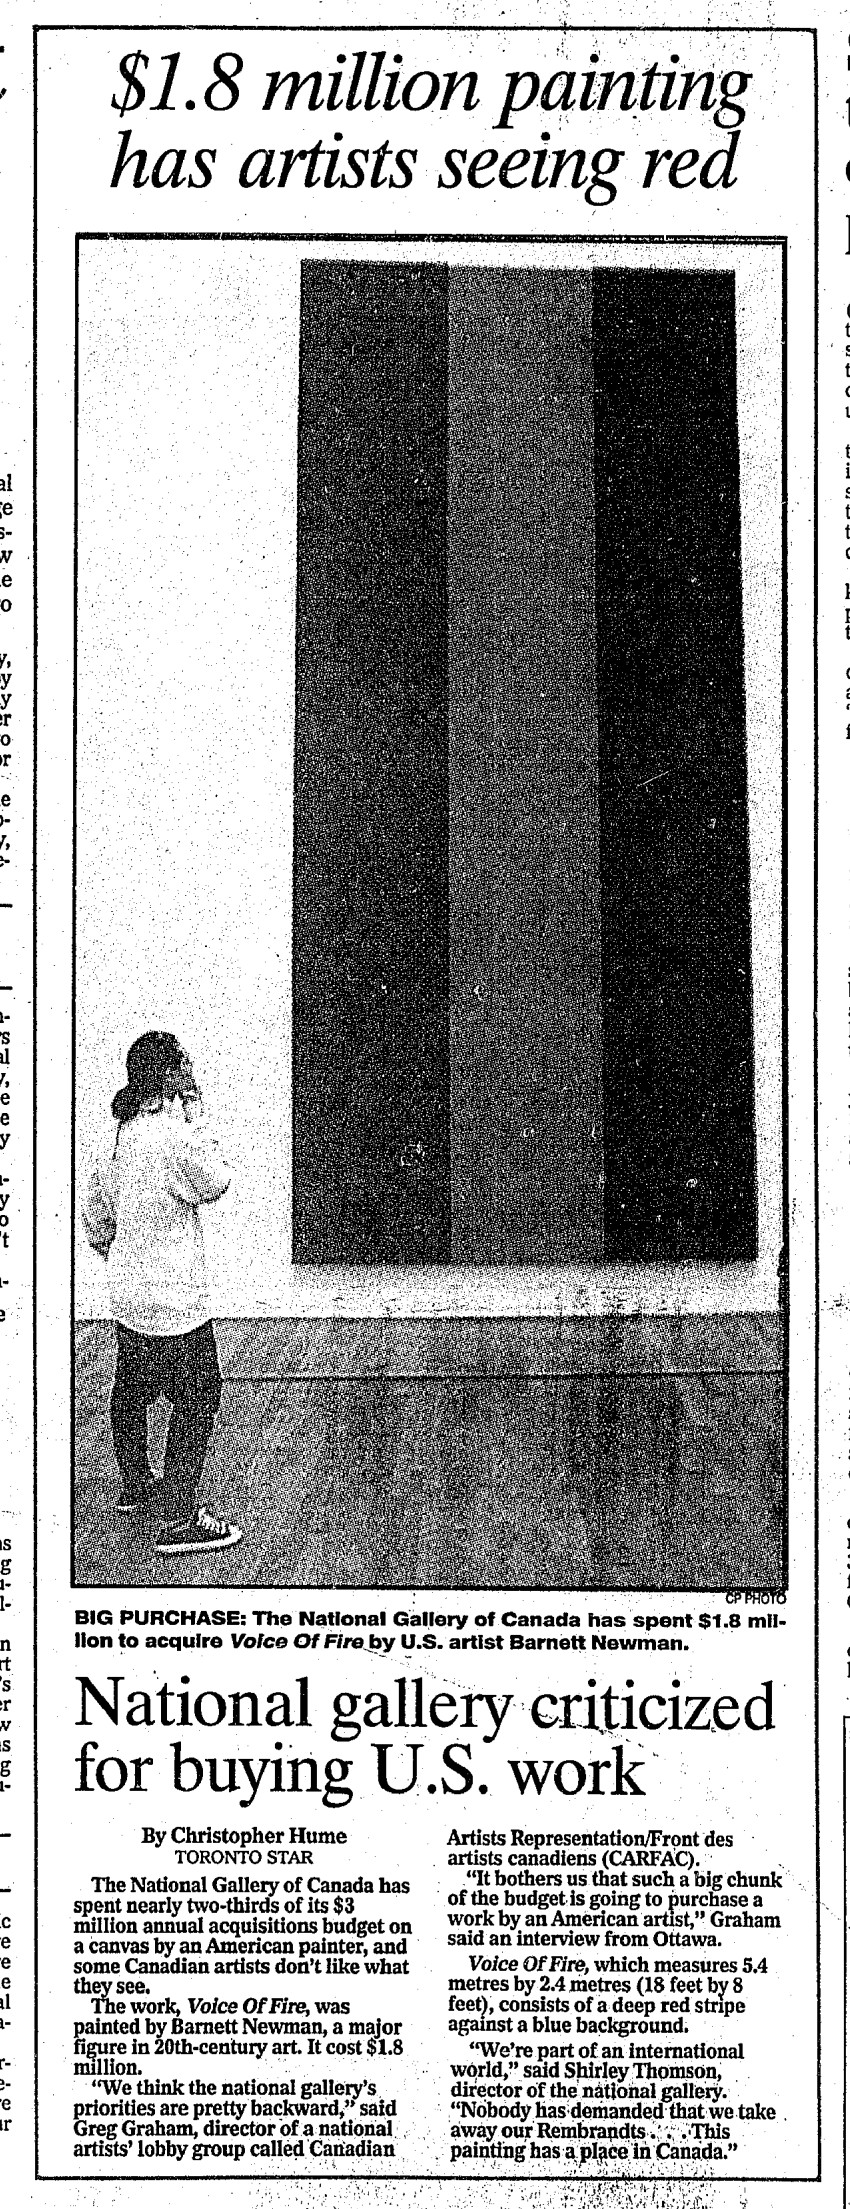 Part of the front page, with black and white photo of the painting